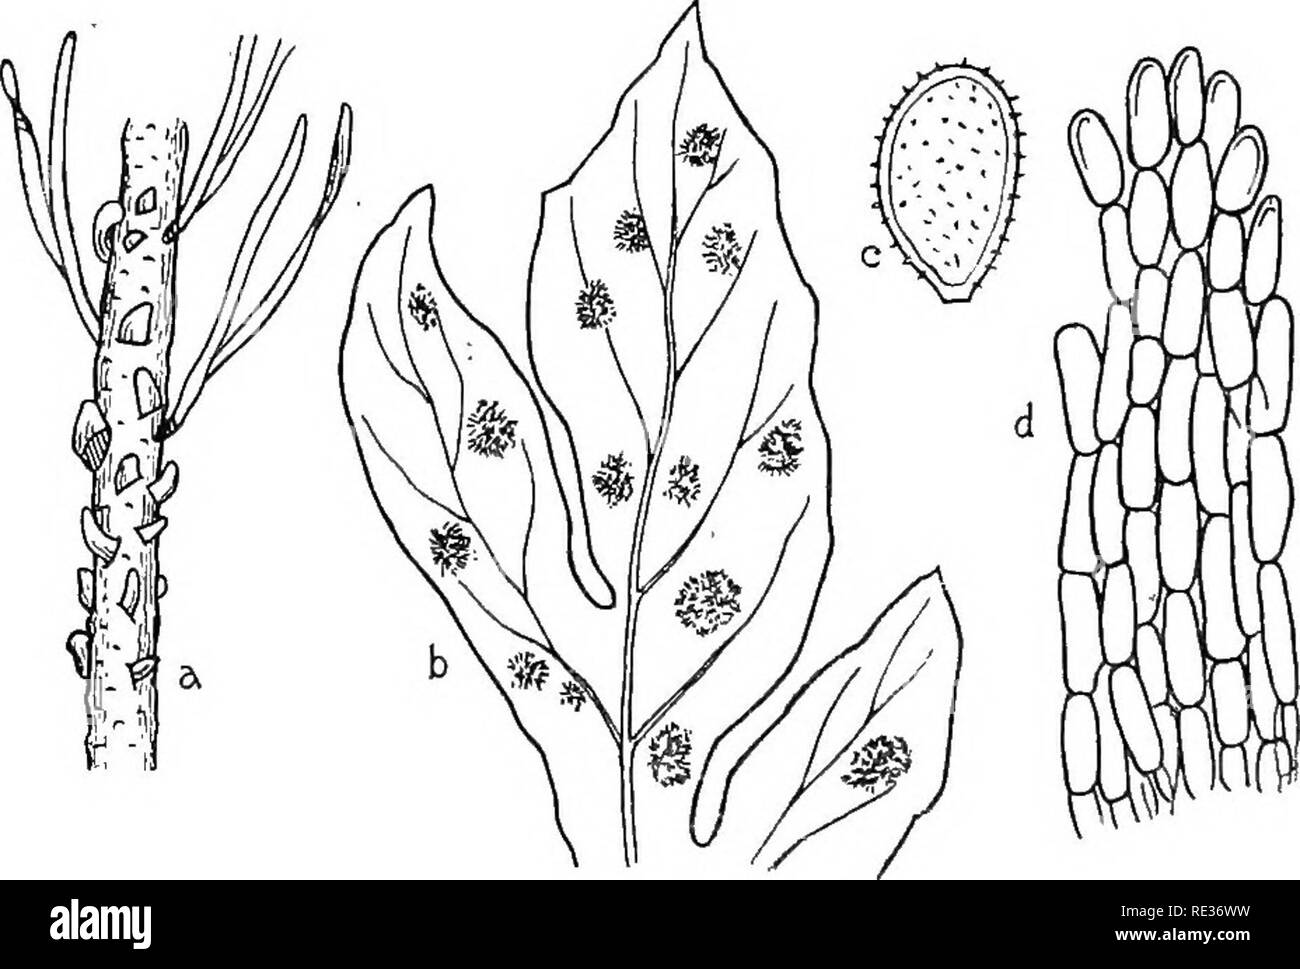 . The British rust fungi (Uredinales) their biology and classification. Rust fungi. 314 CEONAETIUM C. flaccidwm Wint. Pilze, i. 236 (1884). Plowr. Ured. p. 254. Sacc. Syll. vii. 598. Peridermium Cornui Kleb. Zeitschr. f. Pflauzenkr. 1892, ii. 269, pi. 5, f. 2. -^cidiospores. Jilcidia (P. Cornui) erumpent from the bark, forming large reddish-yellow bladders, generally occupying a portion of a branch in large numbers; spores ellipsoid, 22—26 X 16—20/x; epispore 3—4&gt; fi thick, verrucose, thinner on part of its surface and there smooth or somewhat reticulate. Uredospores. Sori small, pustular,  Stock Photo